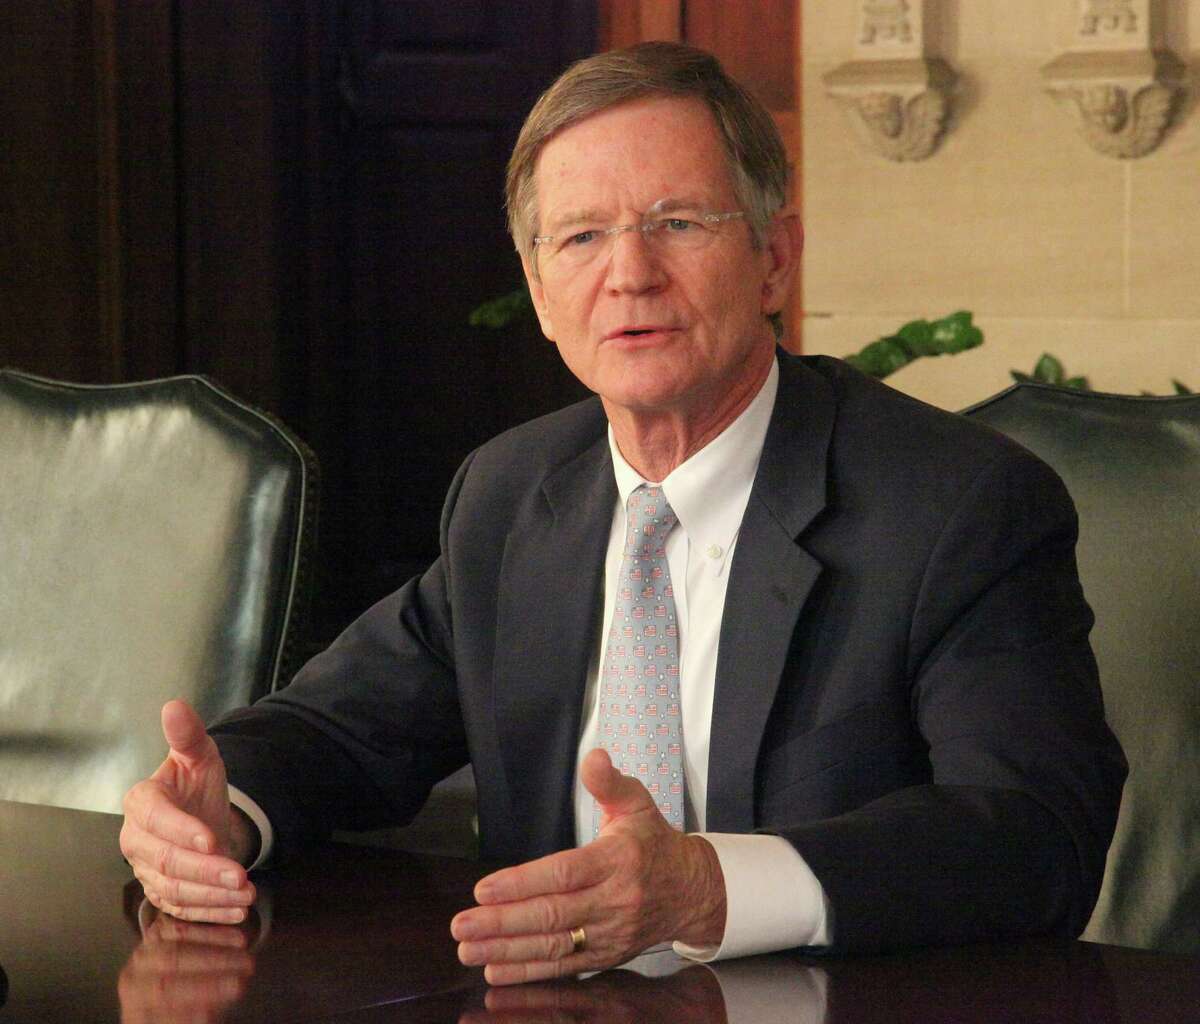 U.S. Rep. Lamar Smith meeting with SAEN Editorial Board for a wide ranging discussion of the government shutdown, Obamacare, immigration reform and other topics November 6, 2013.